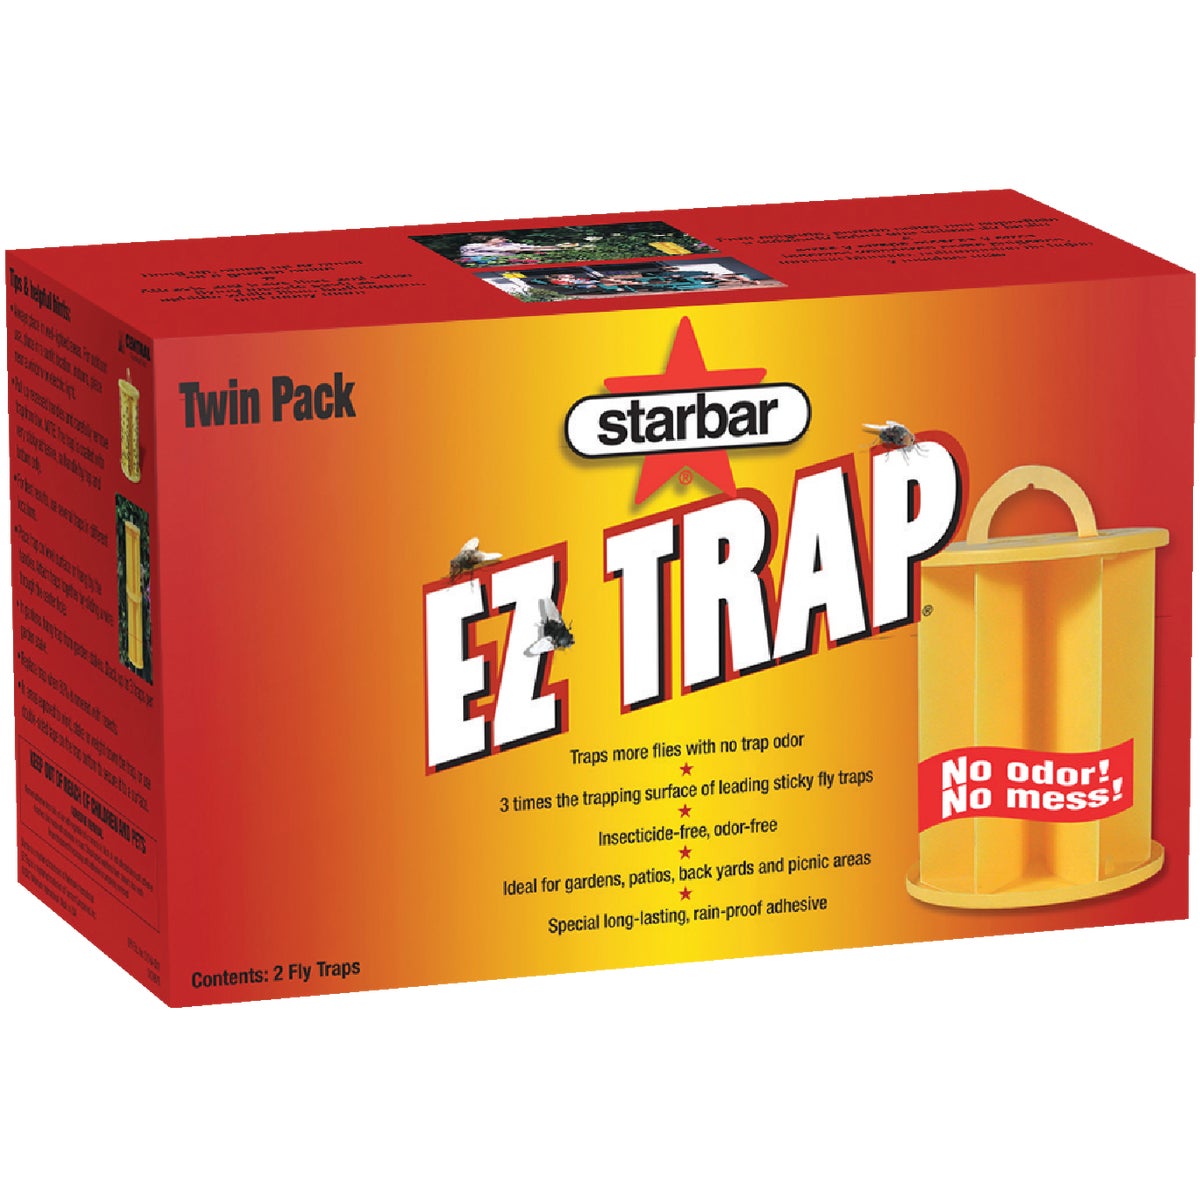 Item 749800, Traps more flies with no fly trap odor.